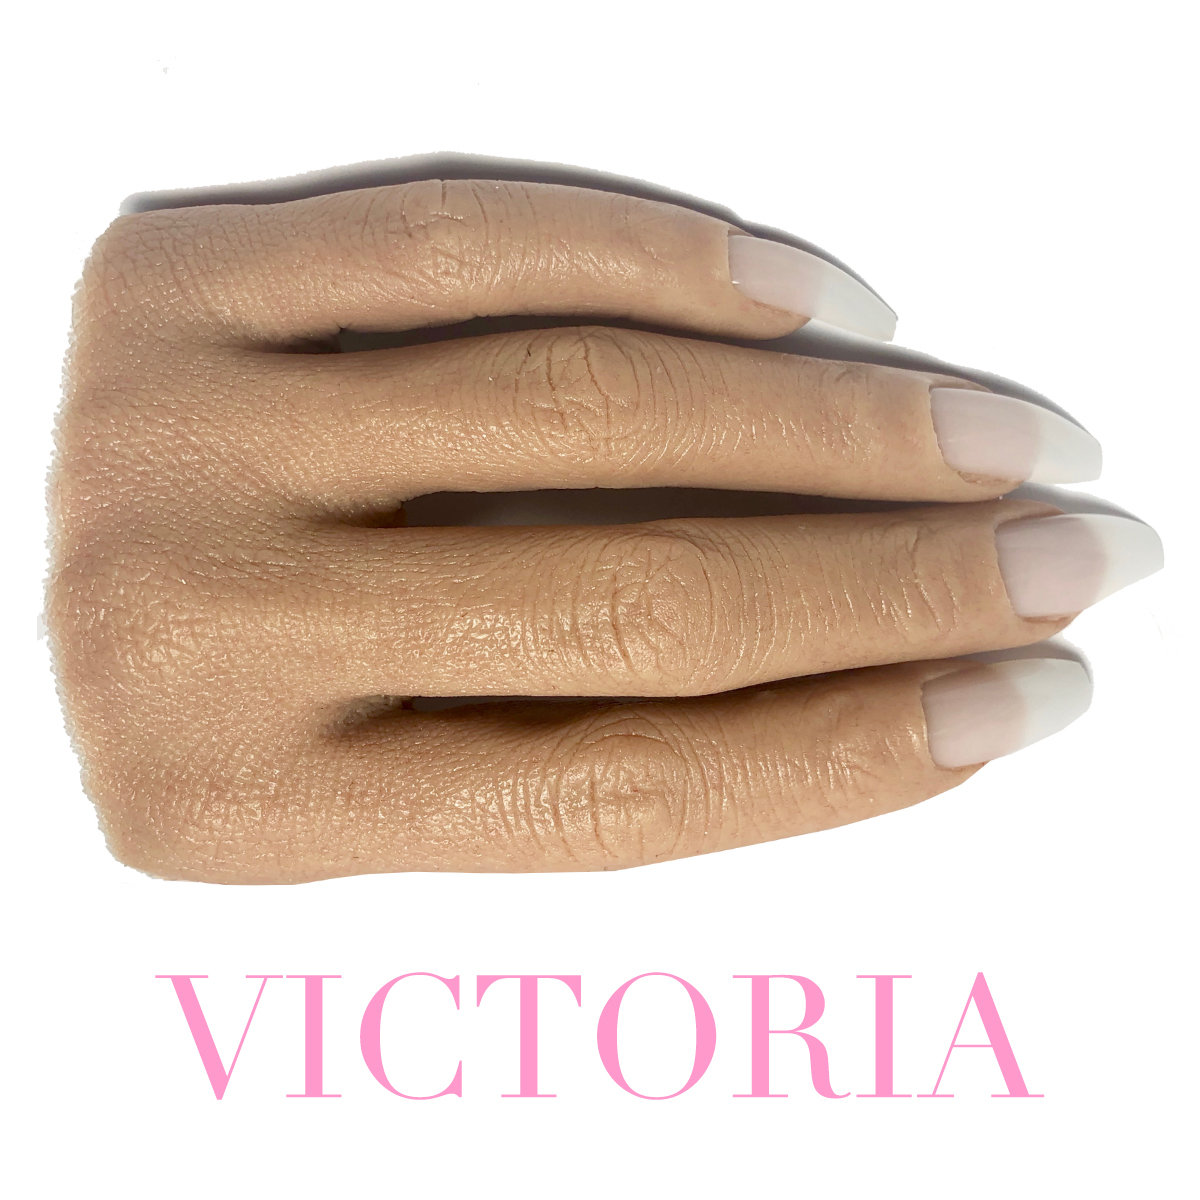 VICTORIA HALF REALISTIC PRACTICE HAND ( PLEASE READ THE DIRECTIONS & WATCH THE VIDEOS BELOW) WILL TAKE 5-8 DAYS TO PROCESS.